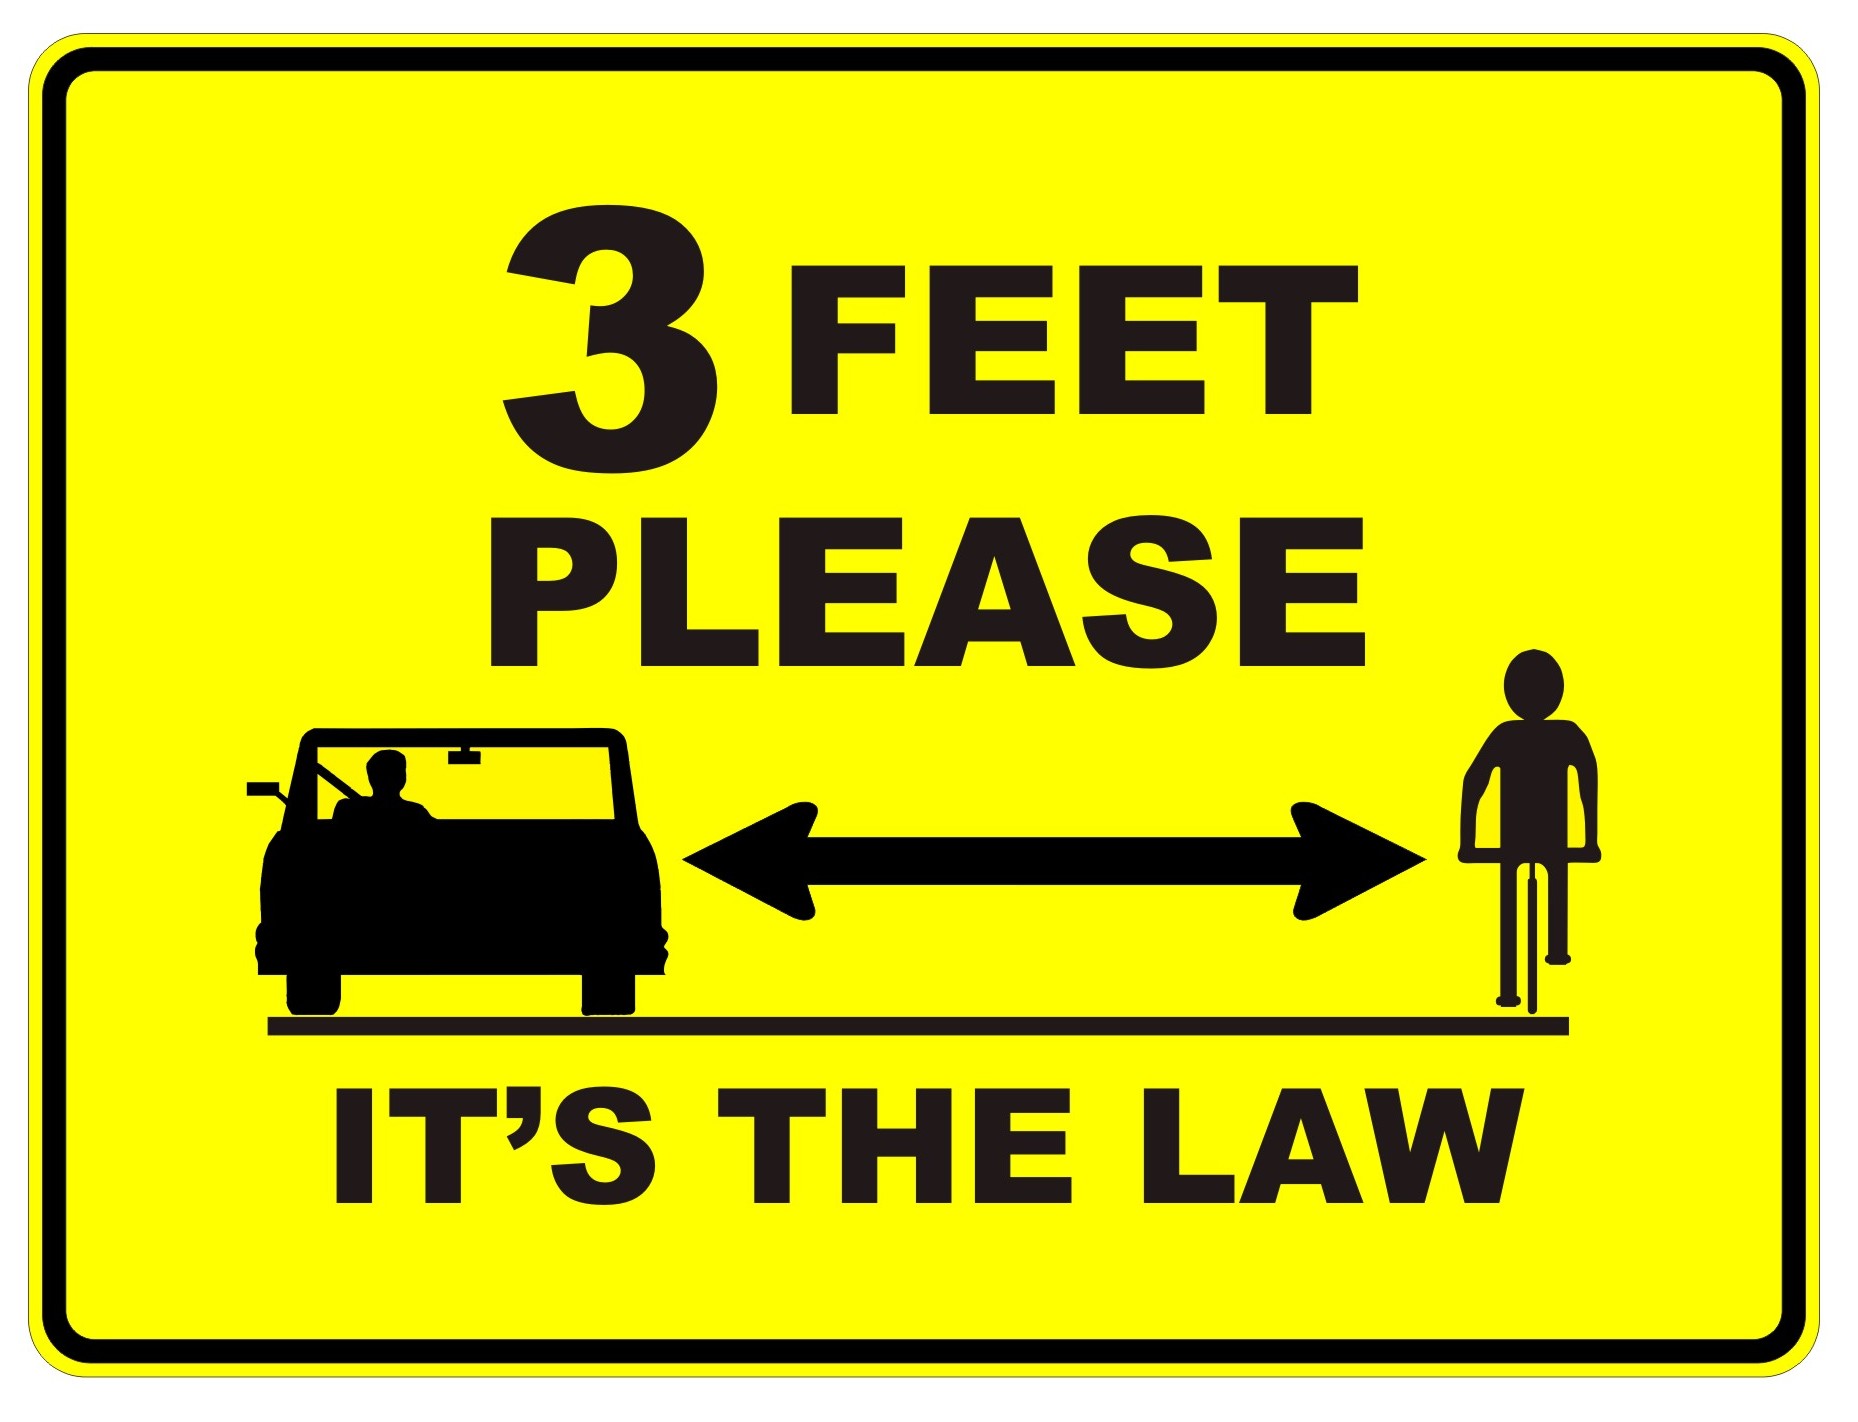 3 feet - NY And PA Bicycle Attorney: What Is A Safe Passing Distance For Motorists? Laws Vary Across U.S.